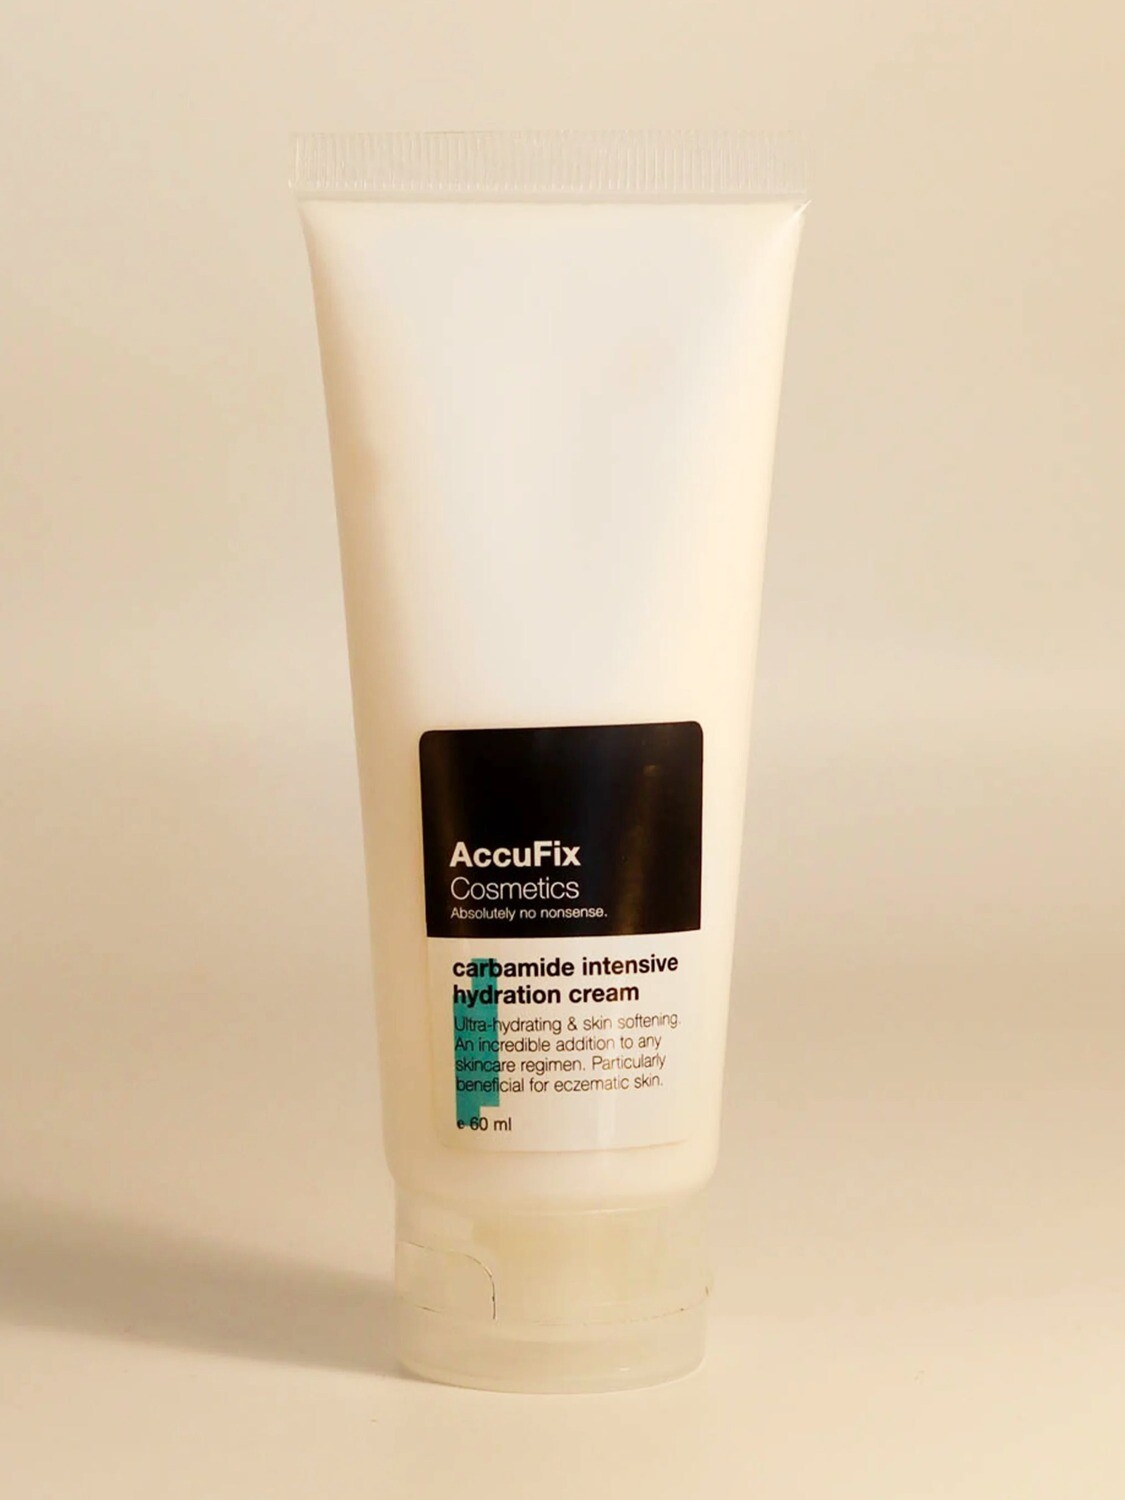 Carbamide Intensive Hydration Cream